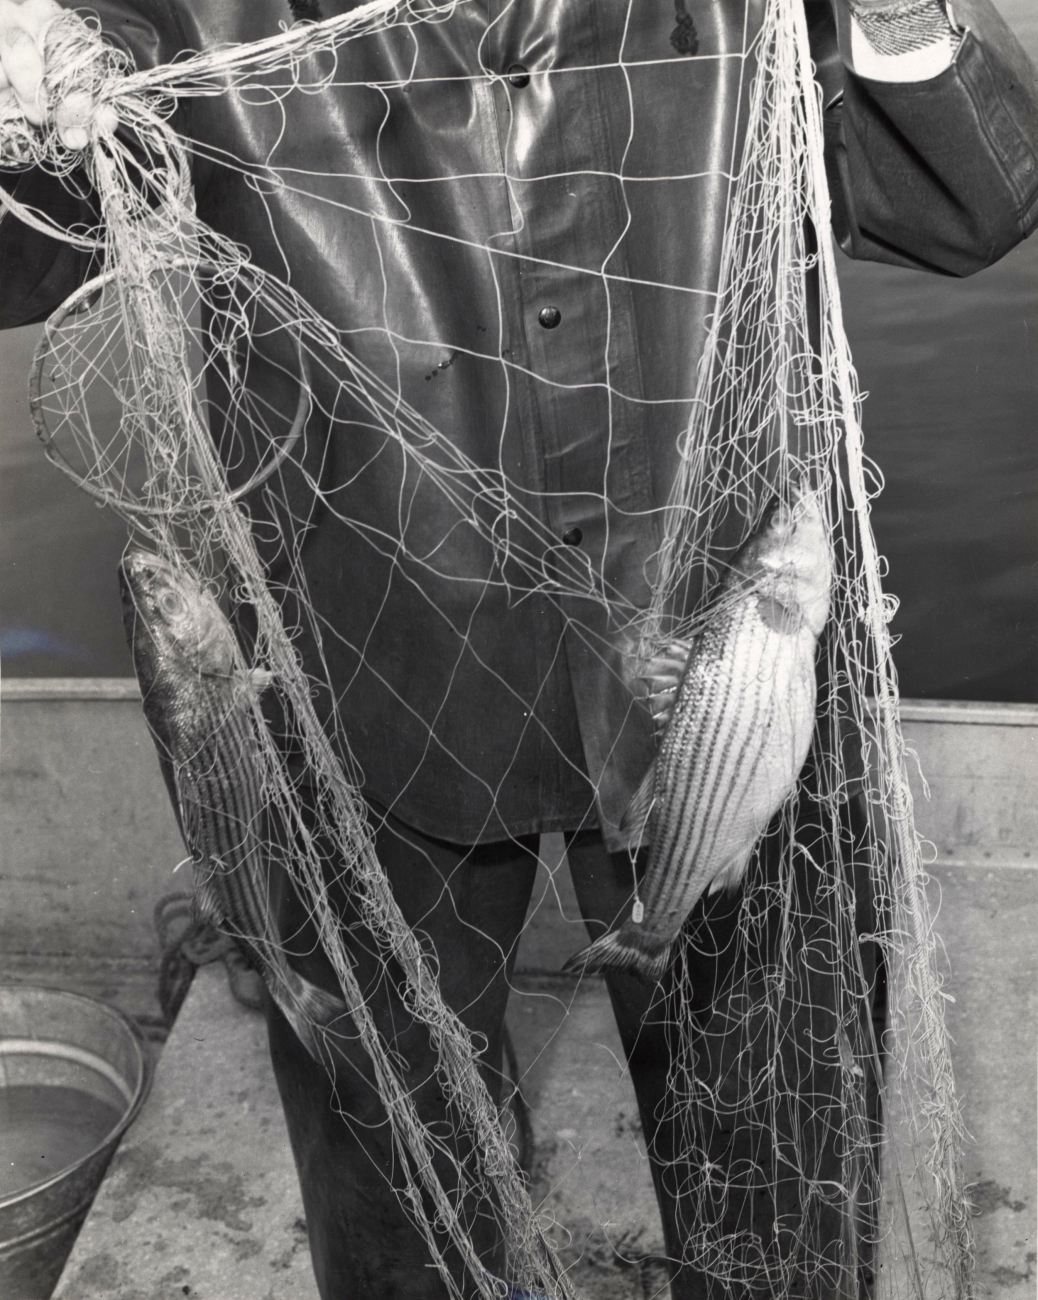 Fish tagged with nylon streamer tag caught in a nylon gill net